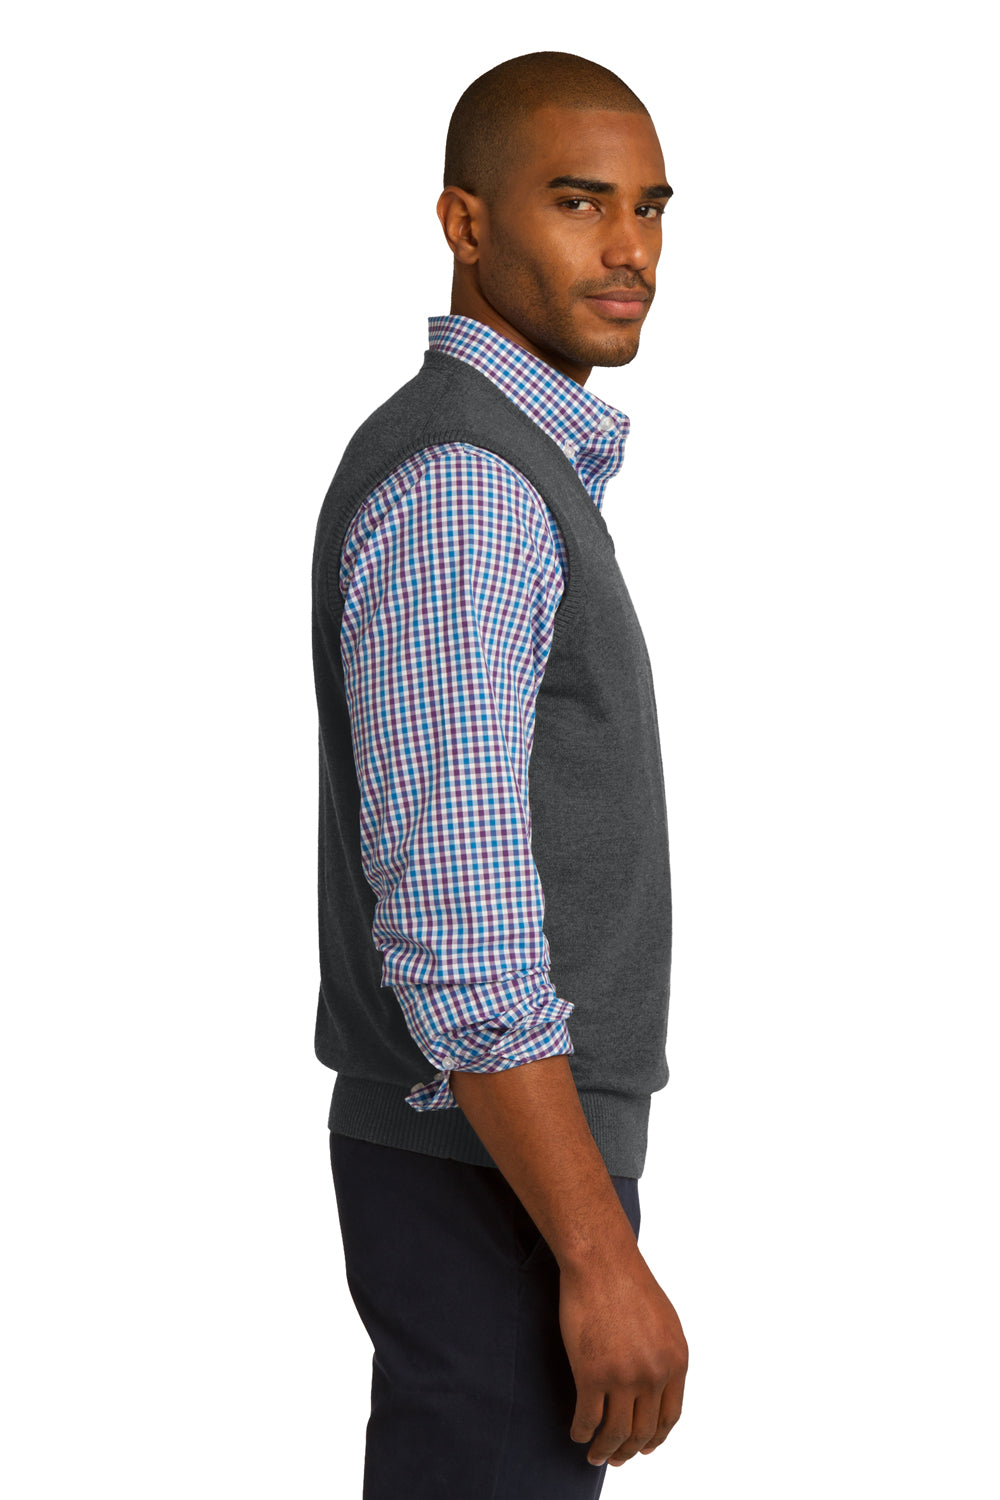 Port Authority SW286 Mens V-Neck Sweater Vest Heather Charcoal Grey Side